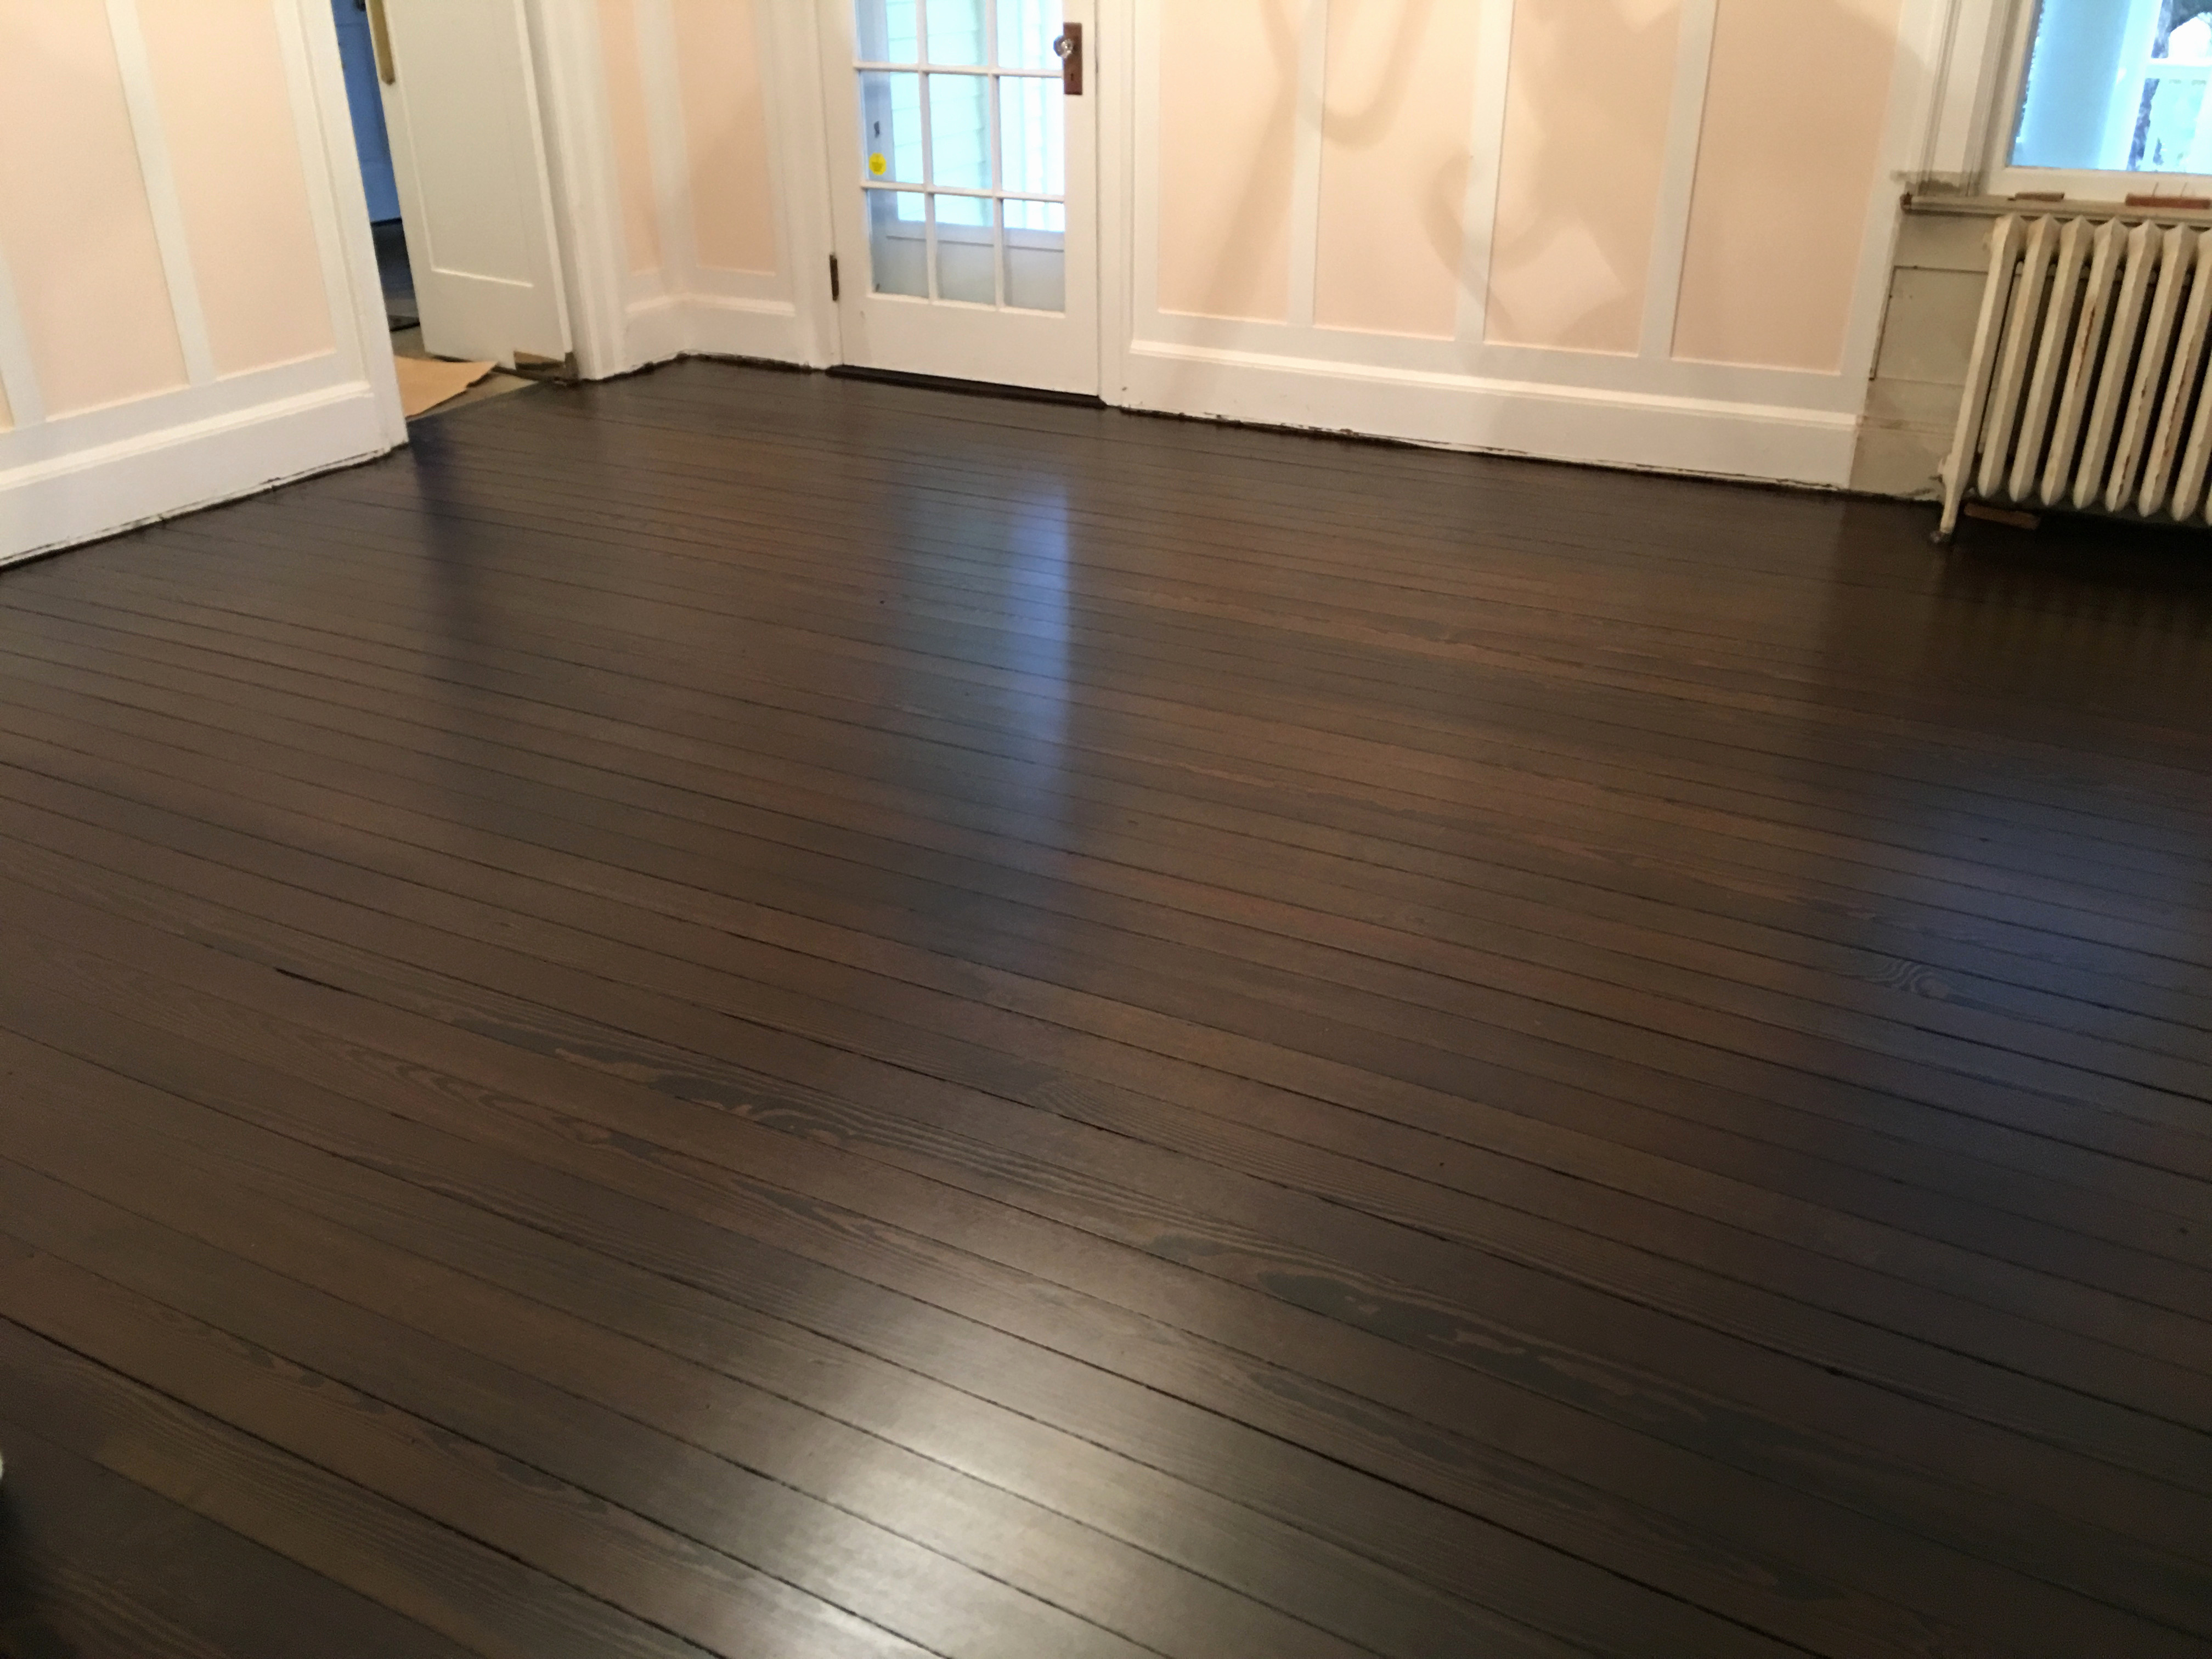 28 Perfect Hardwood Floor Installation Nh 2024 free download hardwood floor installation nh of hardwoodfloor low voc canada archives wlcu with hardwood floor color trends 2017 elegant wood floor color trends cheap laminate wood flooring hardwood floor